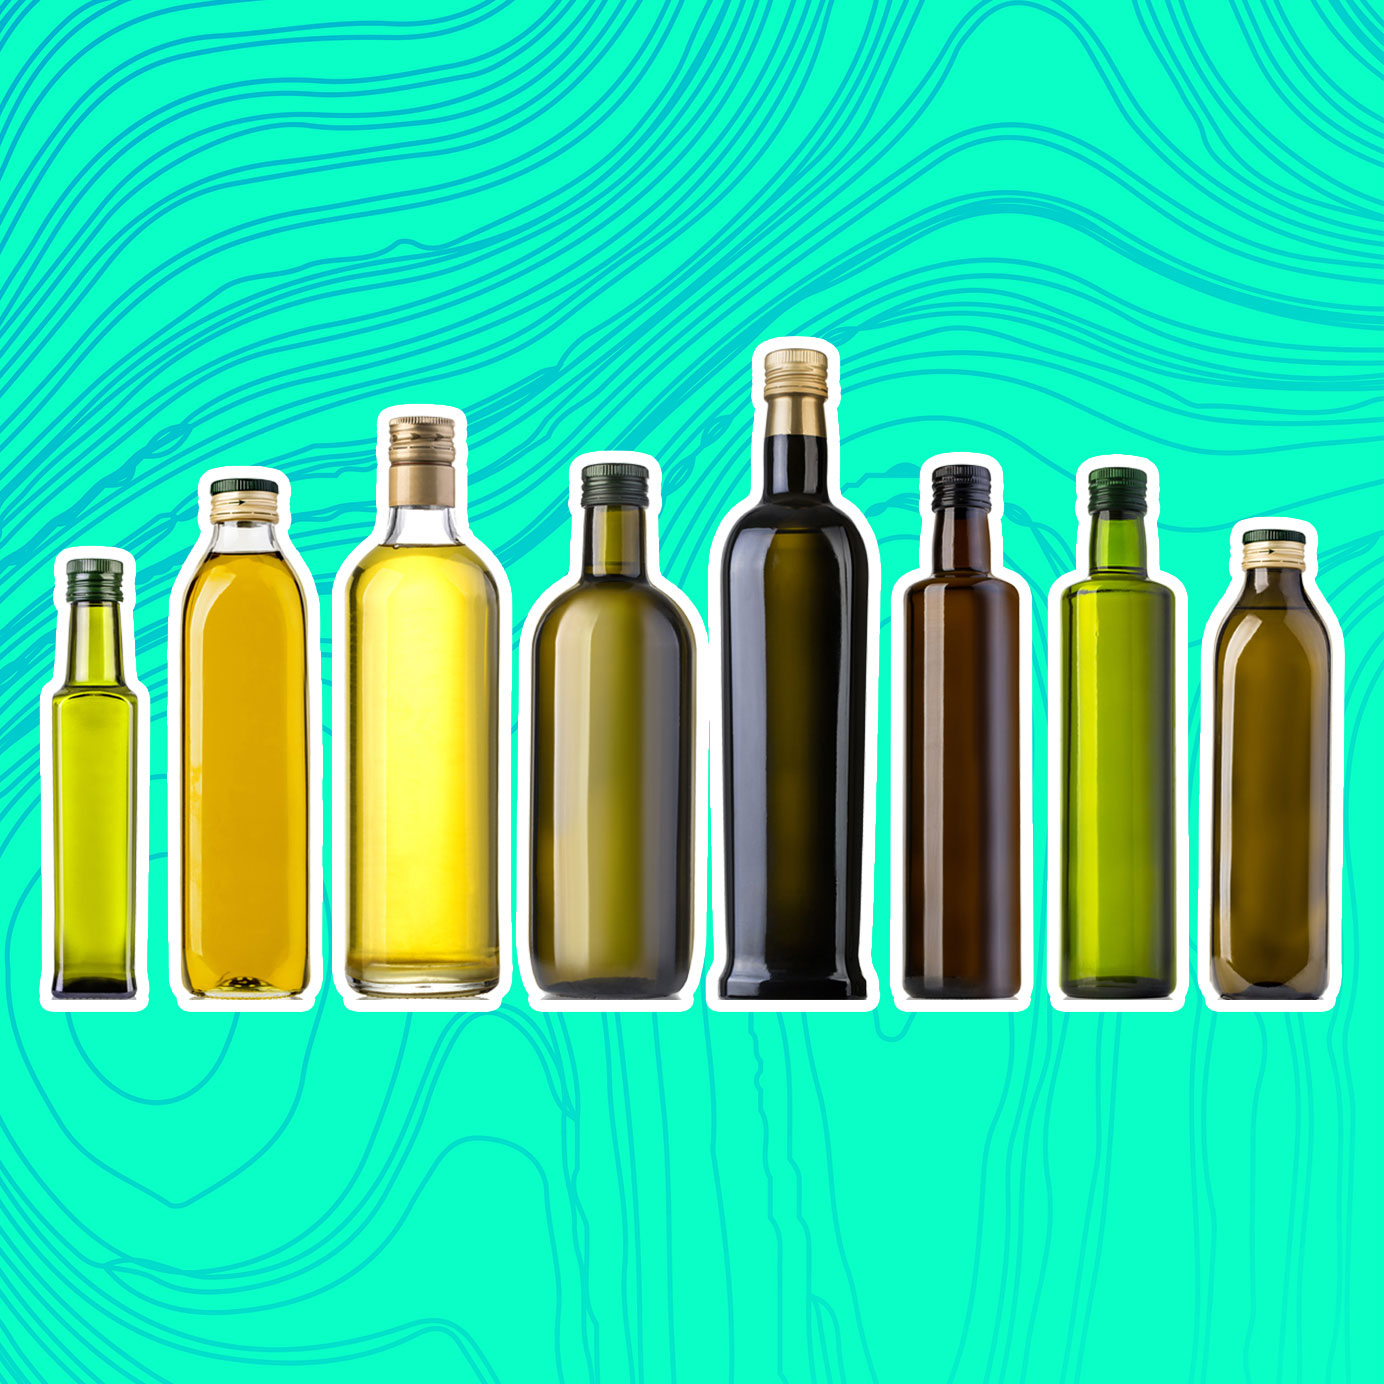 4 Things You Need to Know When Shopping for Olive Oil